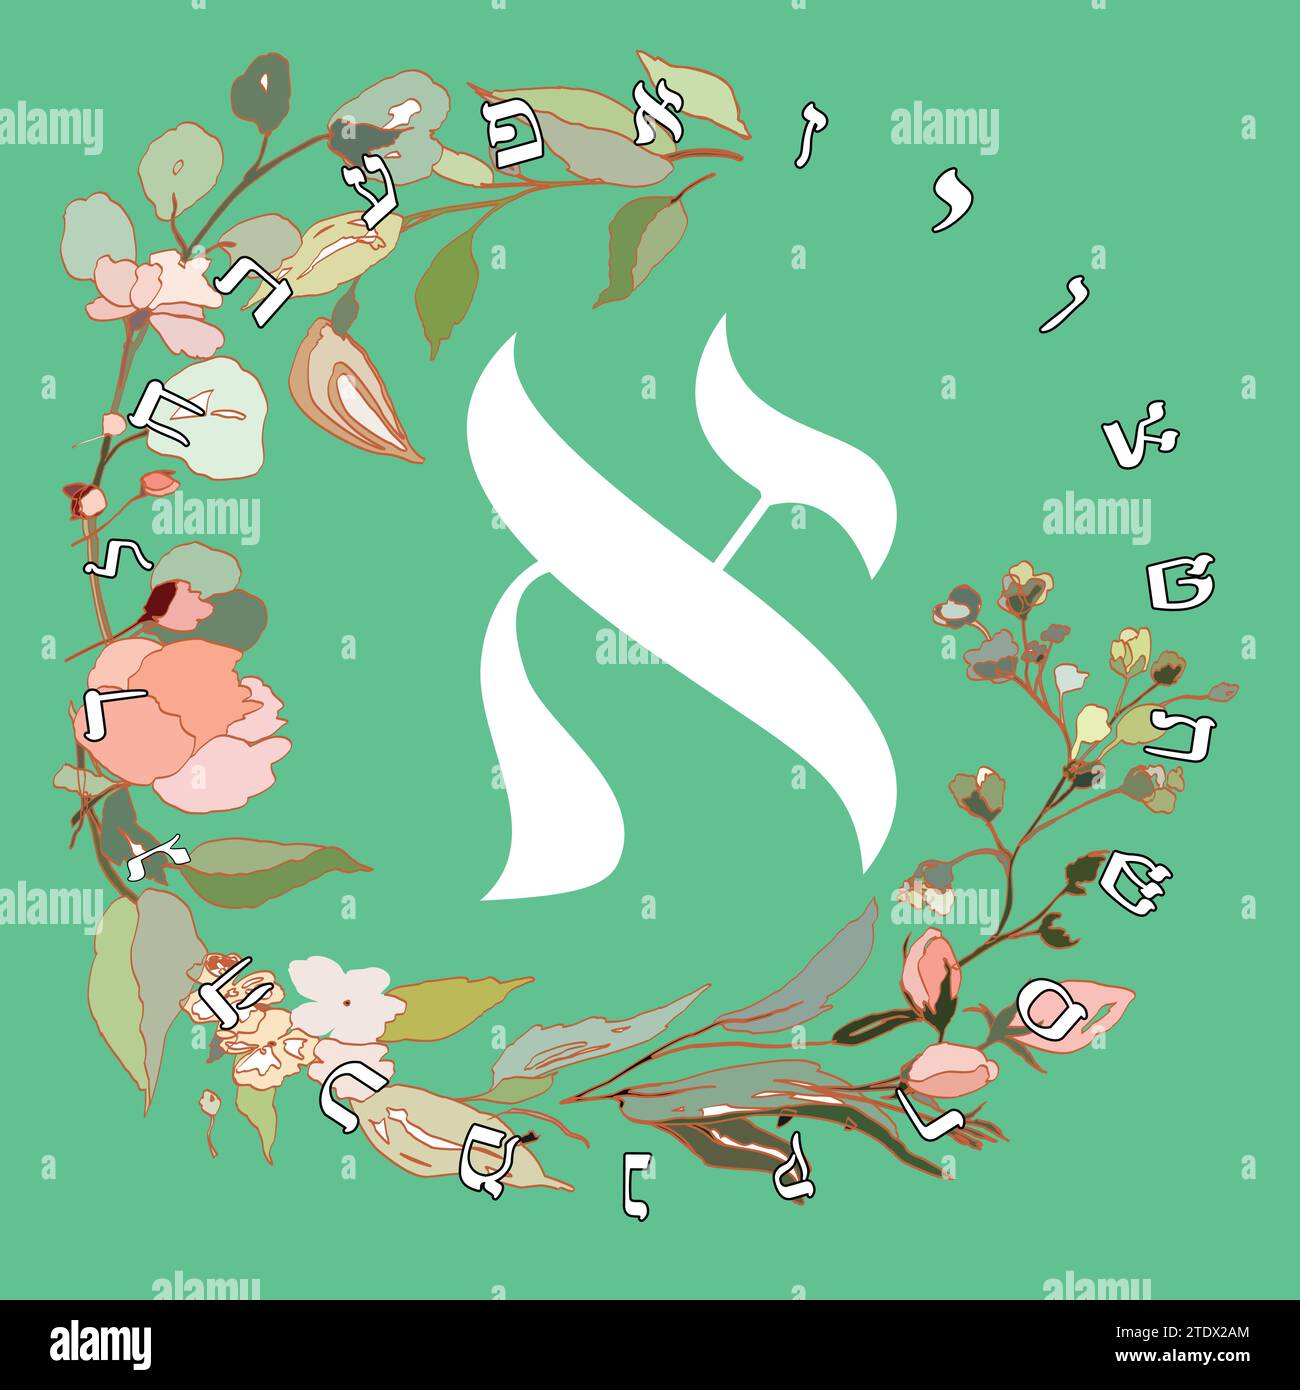 Vector illustration of the Hebrew alphabet with floral design. Hebrew letter called Aleph white on green background. Stock Vector